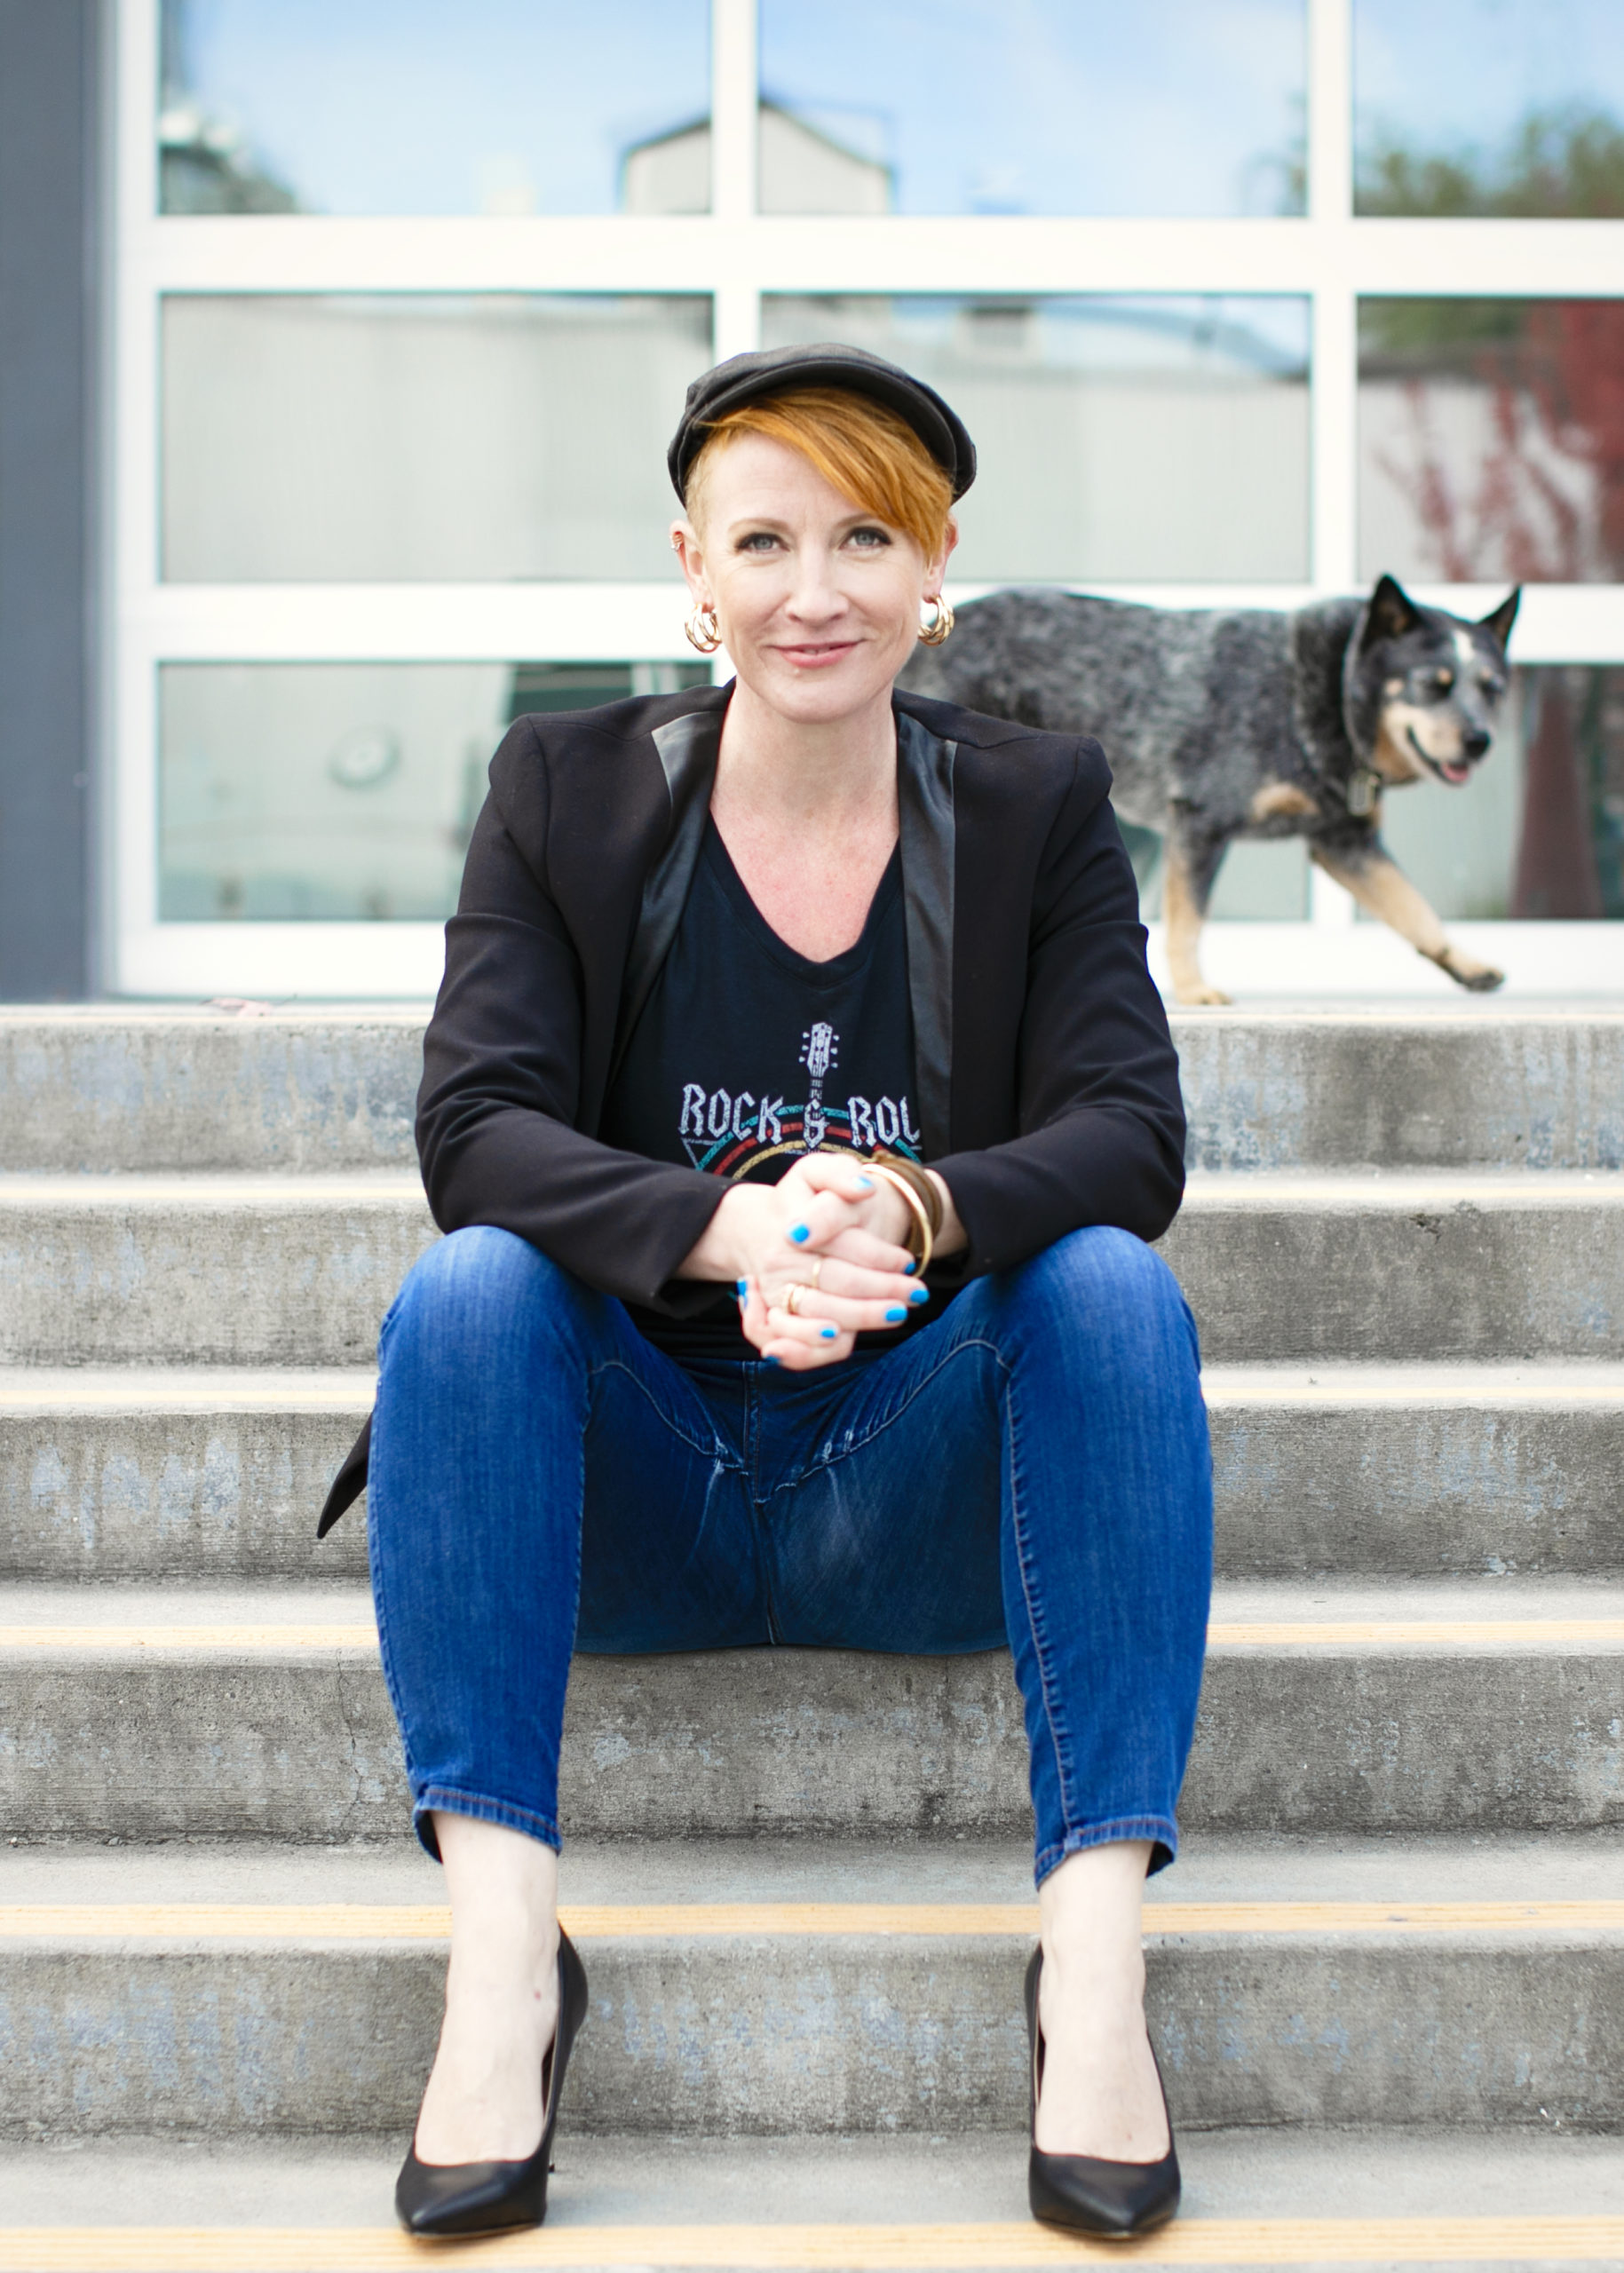 Copywriter Belinda Weaver sits on some stairs, looking chilled with dog walking behind her